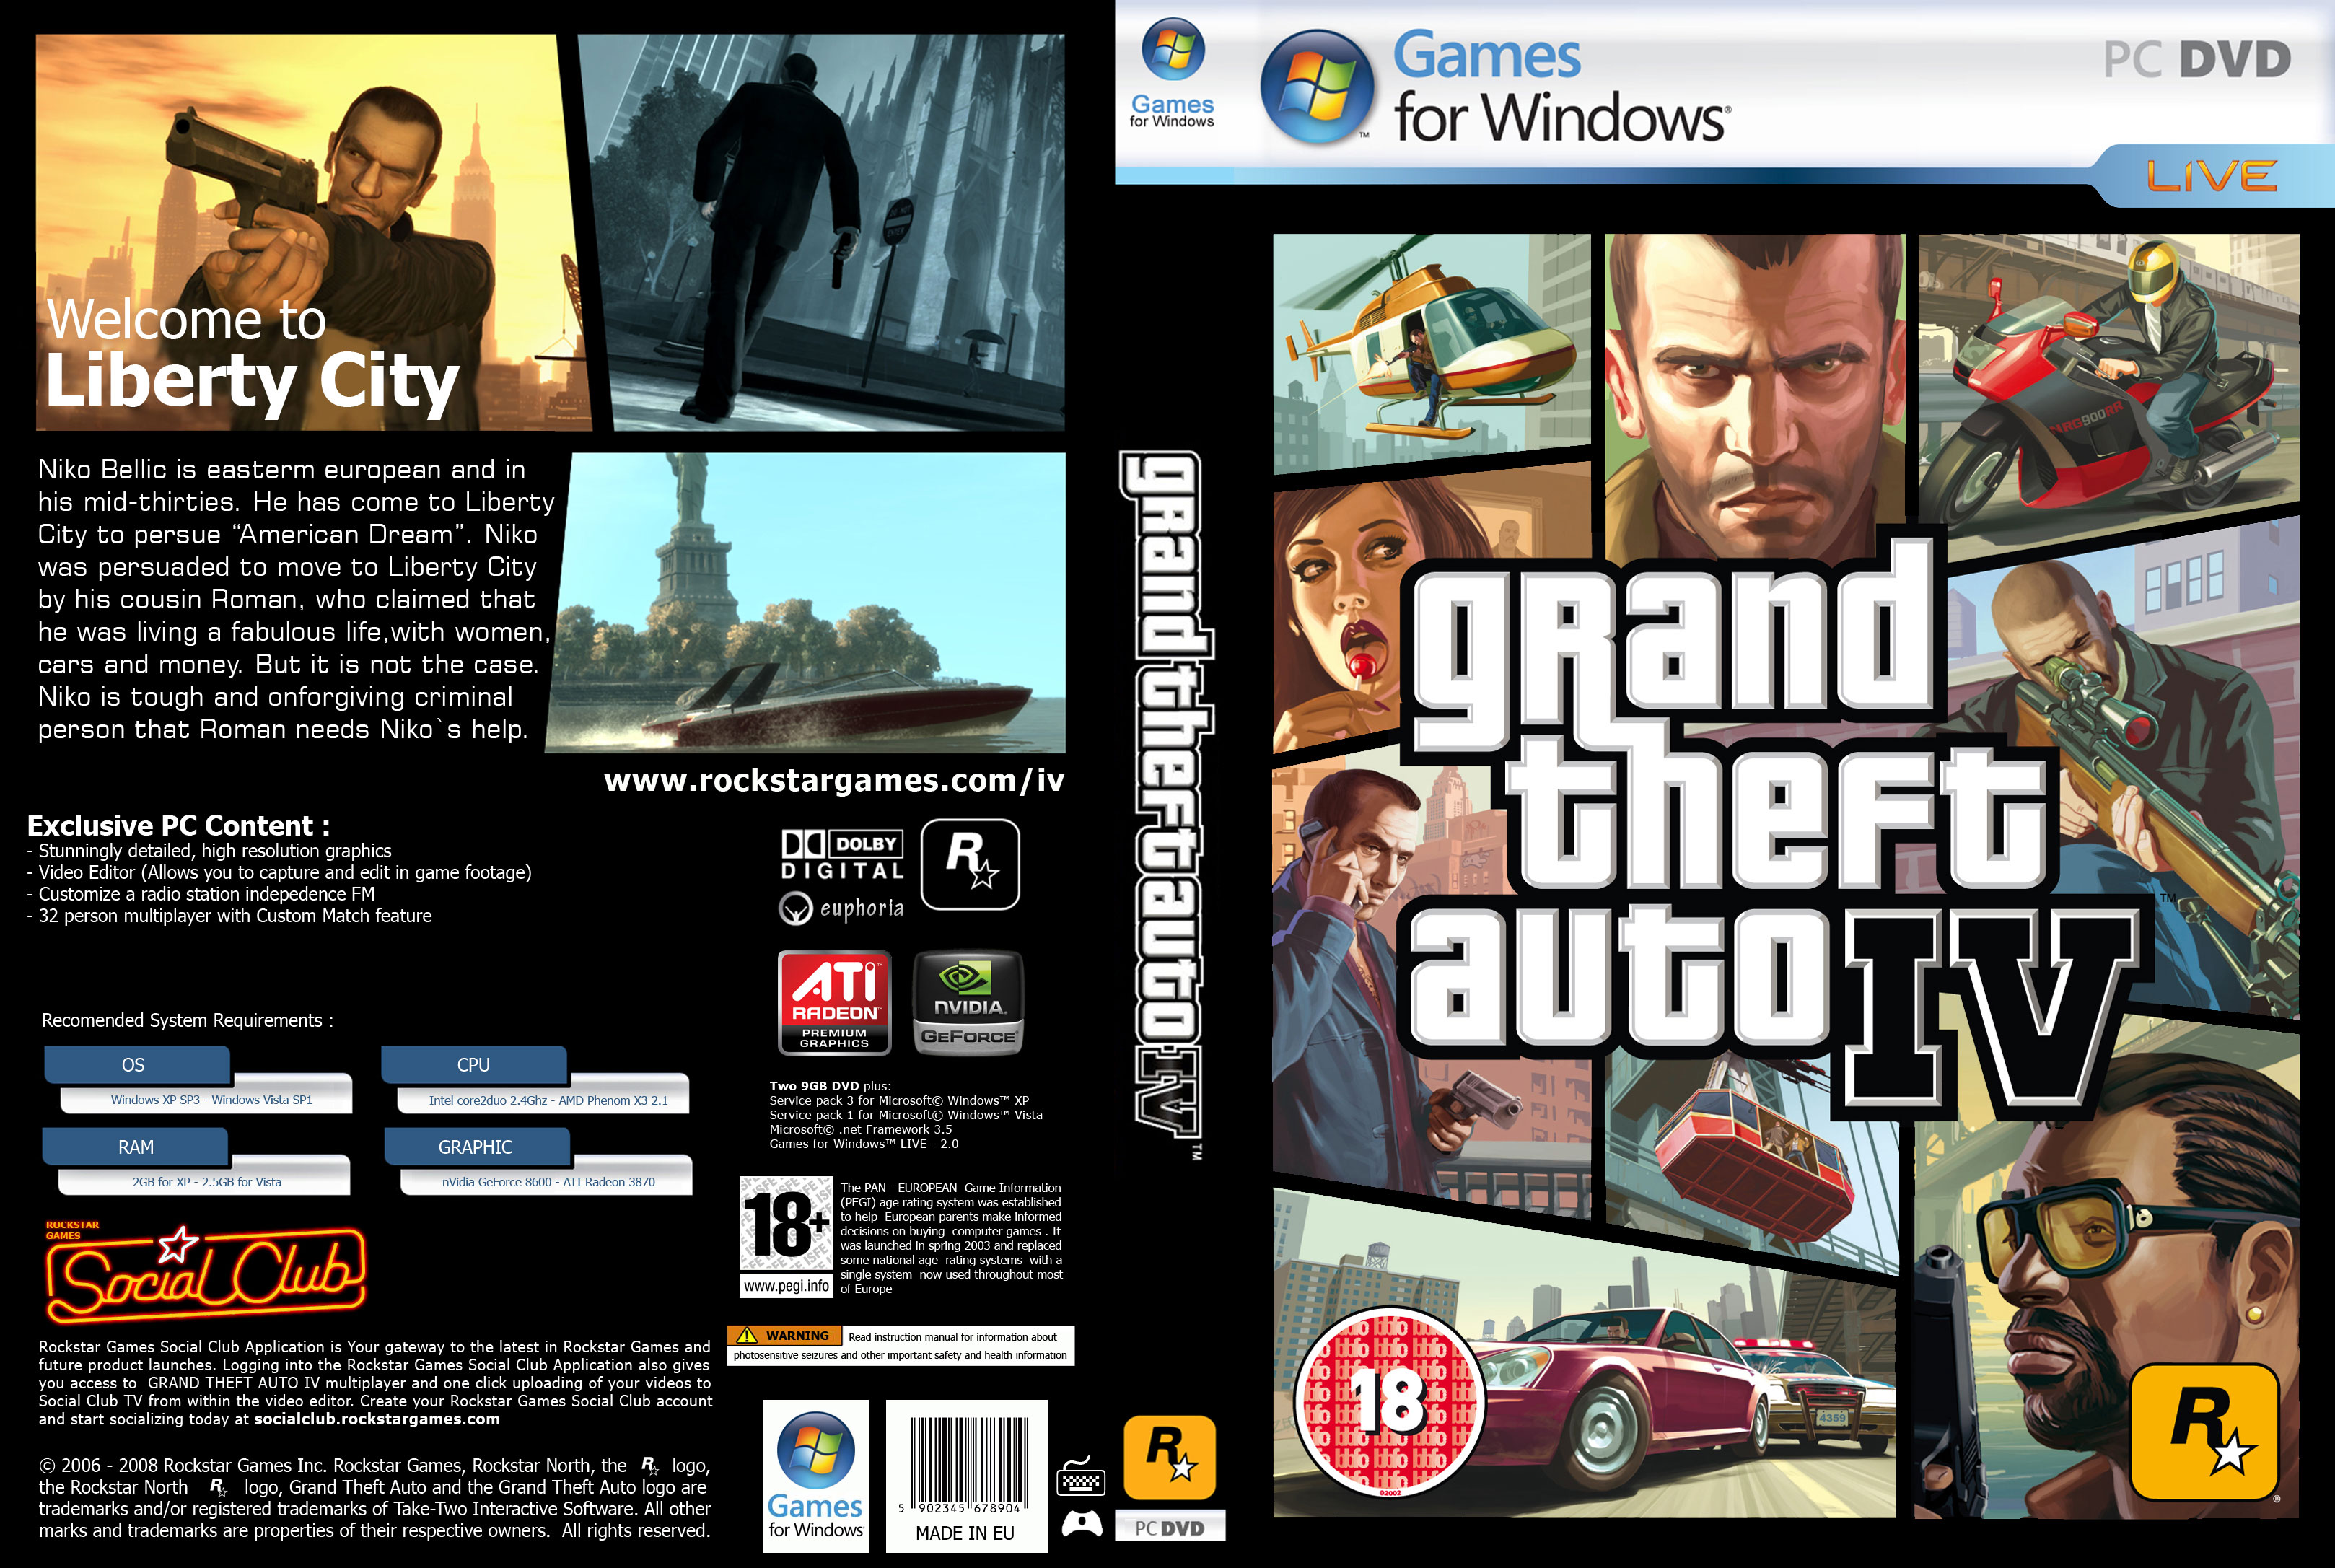 Download game ps2 iso highly compressed 10mb